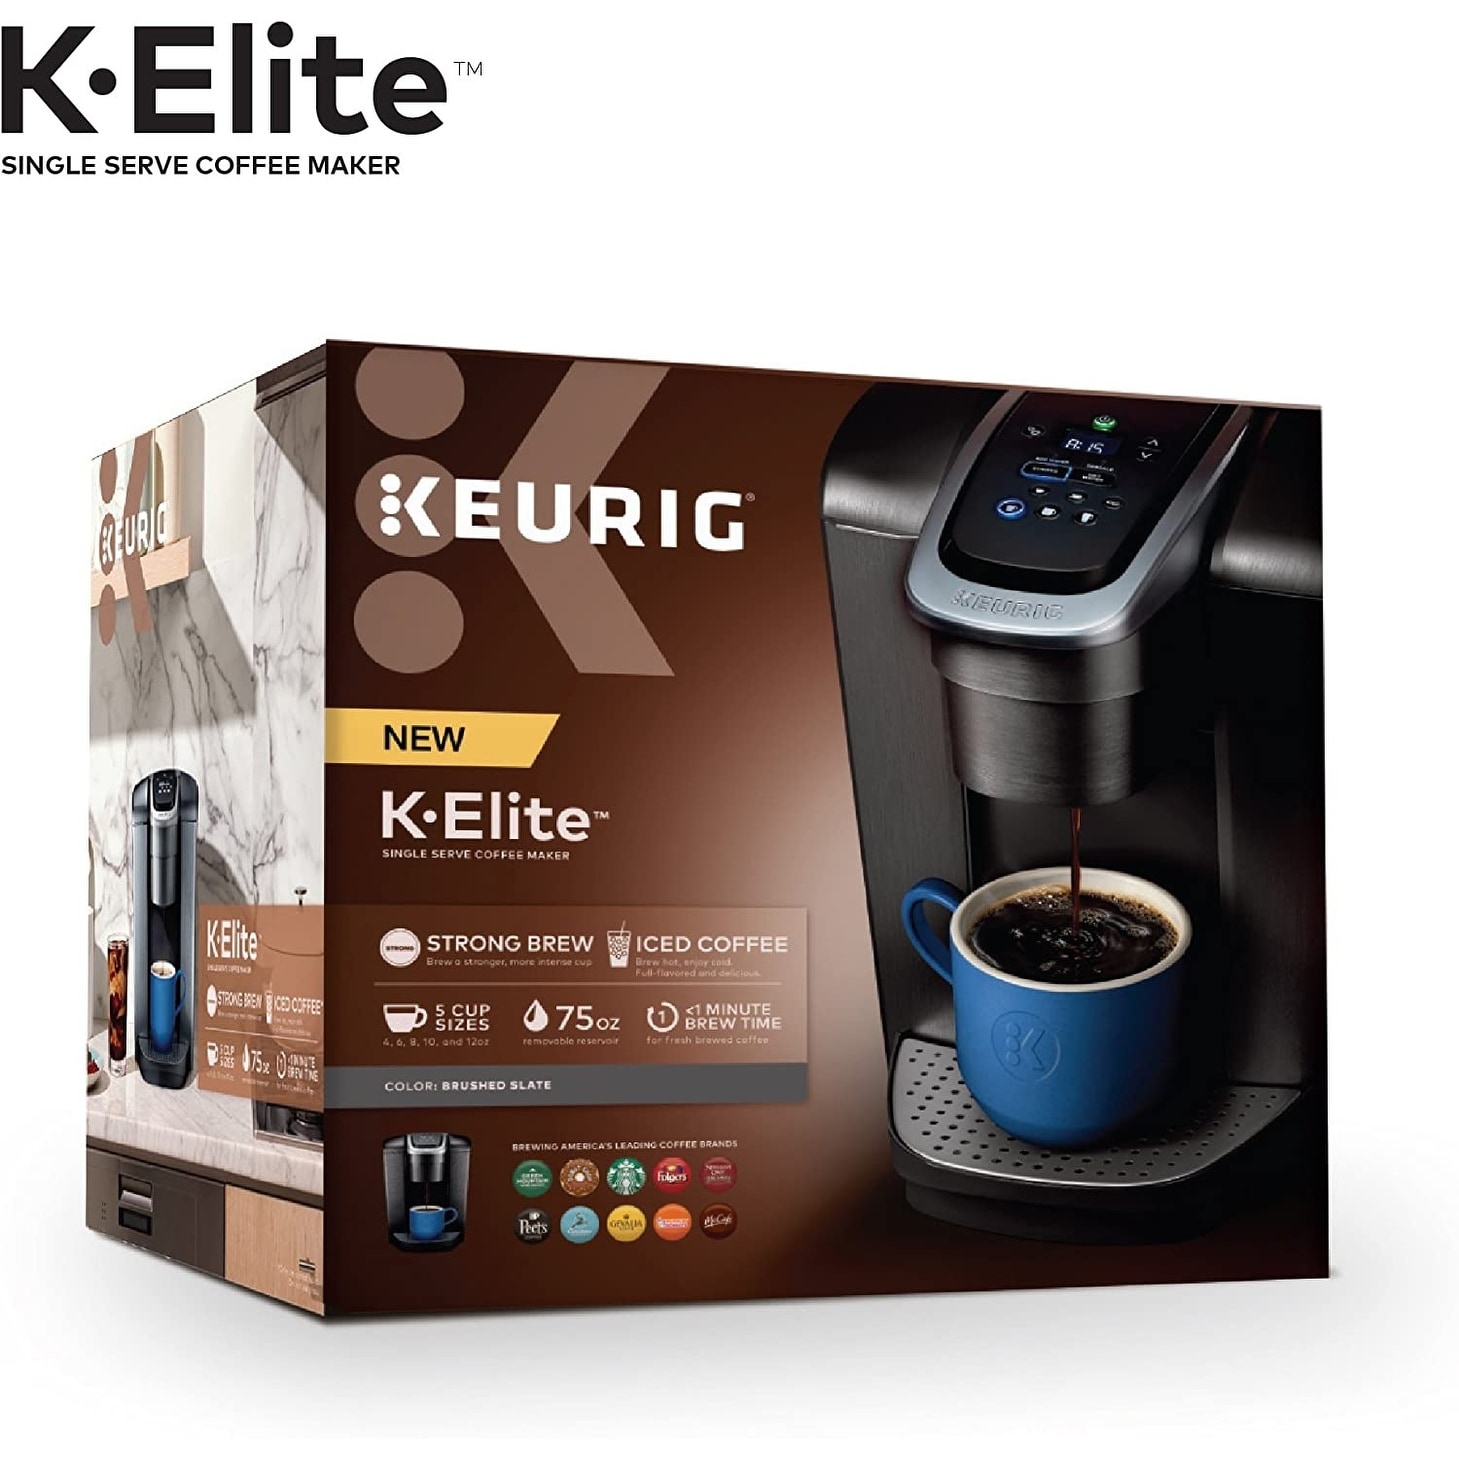 https://ak1.ostkcdn.com/images/products/is/images/direct/6996cf824dc9fd6848bdf7a9e1d828244cf12570/Keurig-K-Elite-Coffee-Maker%2C-Single-Serve-K-Cup-Pod-Coffee-Brewer%2C-With-Iced-Coffee-Capability.jpg